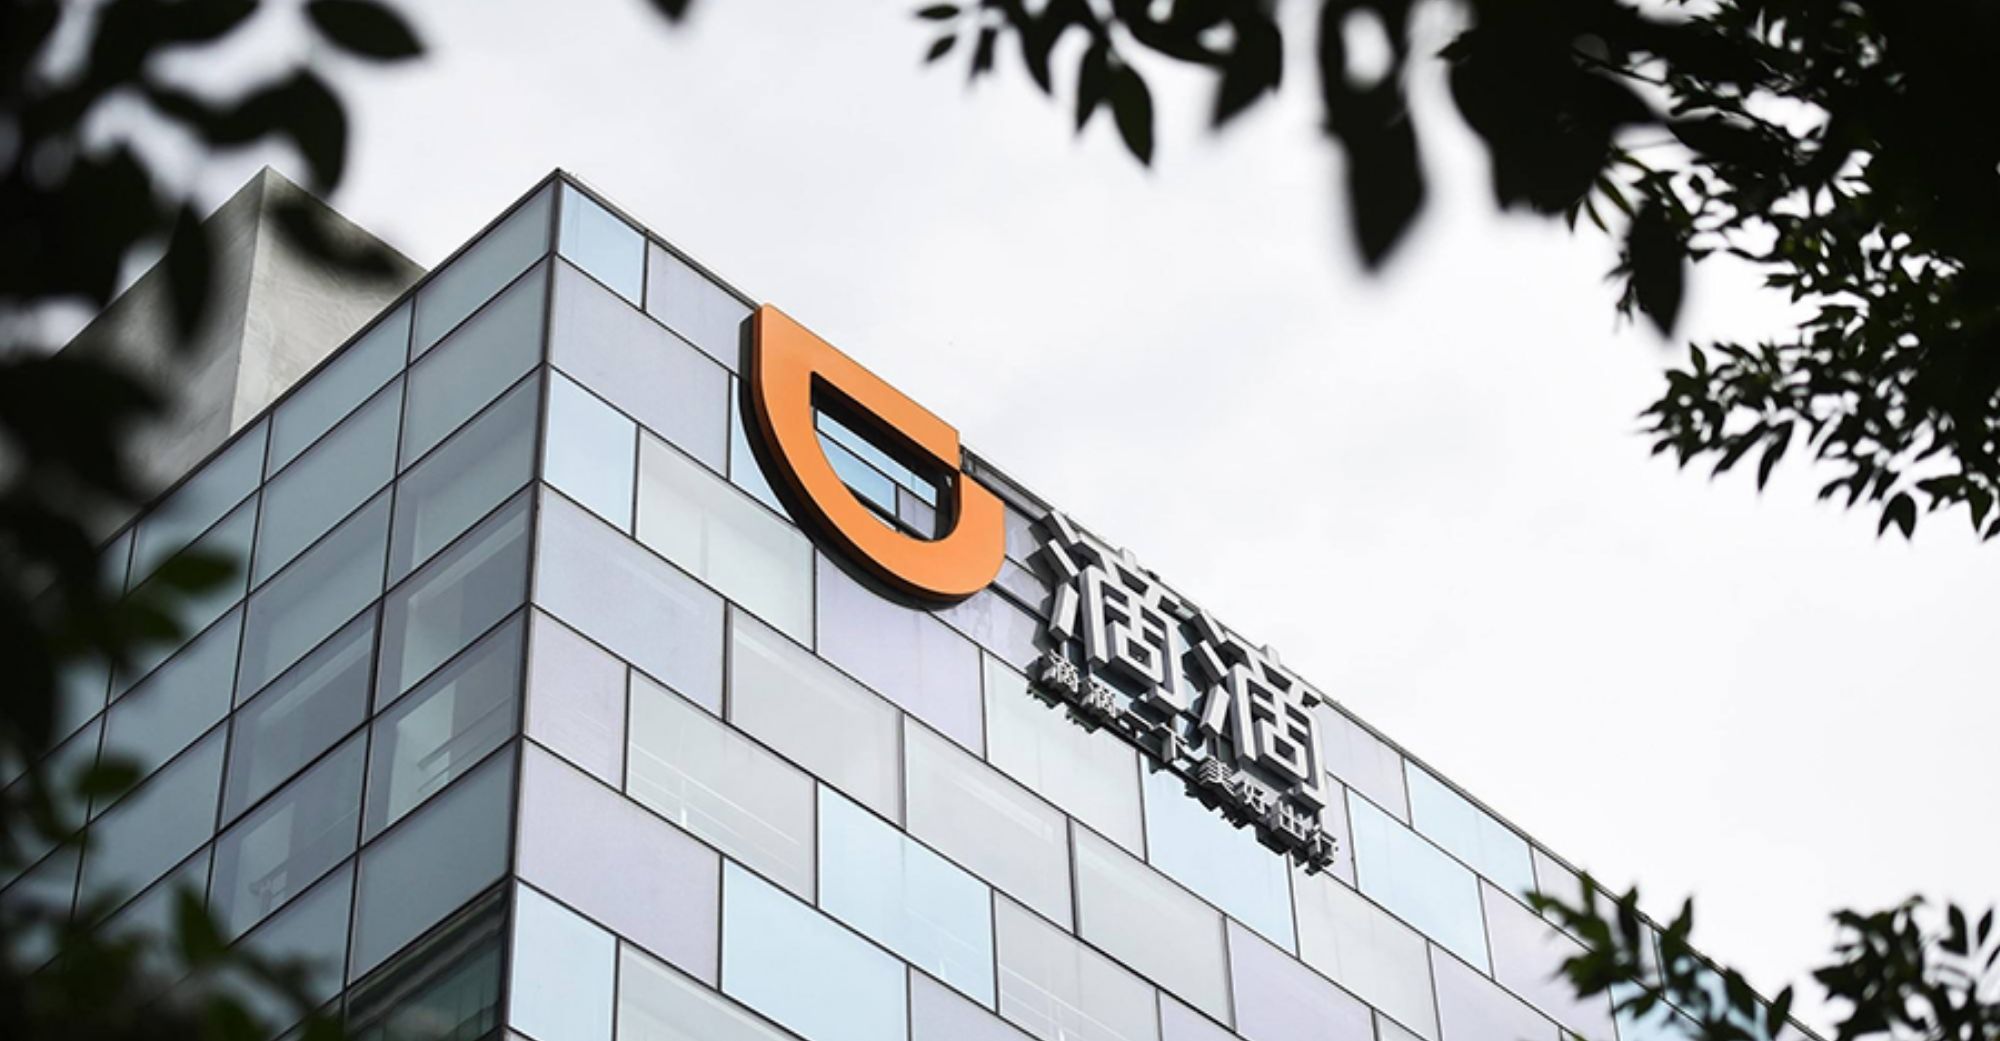 Didi Chuxing Compensated 280 Million Yuan of Unpaid Ride Fares in 2020, Open Letter Reveals